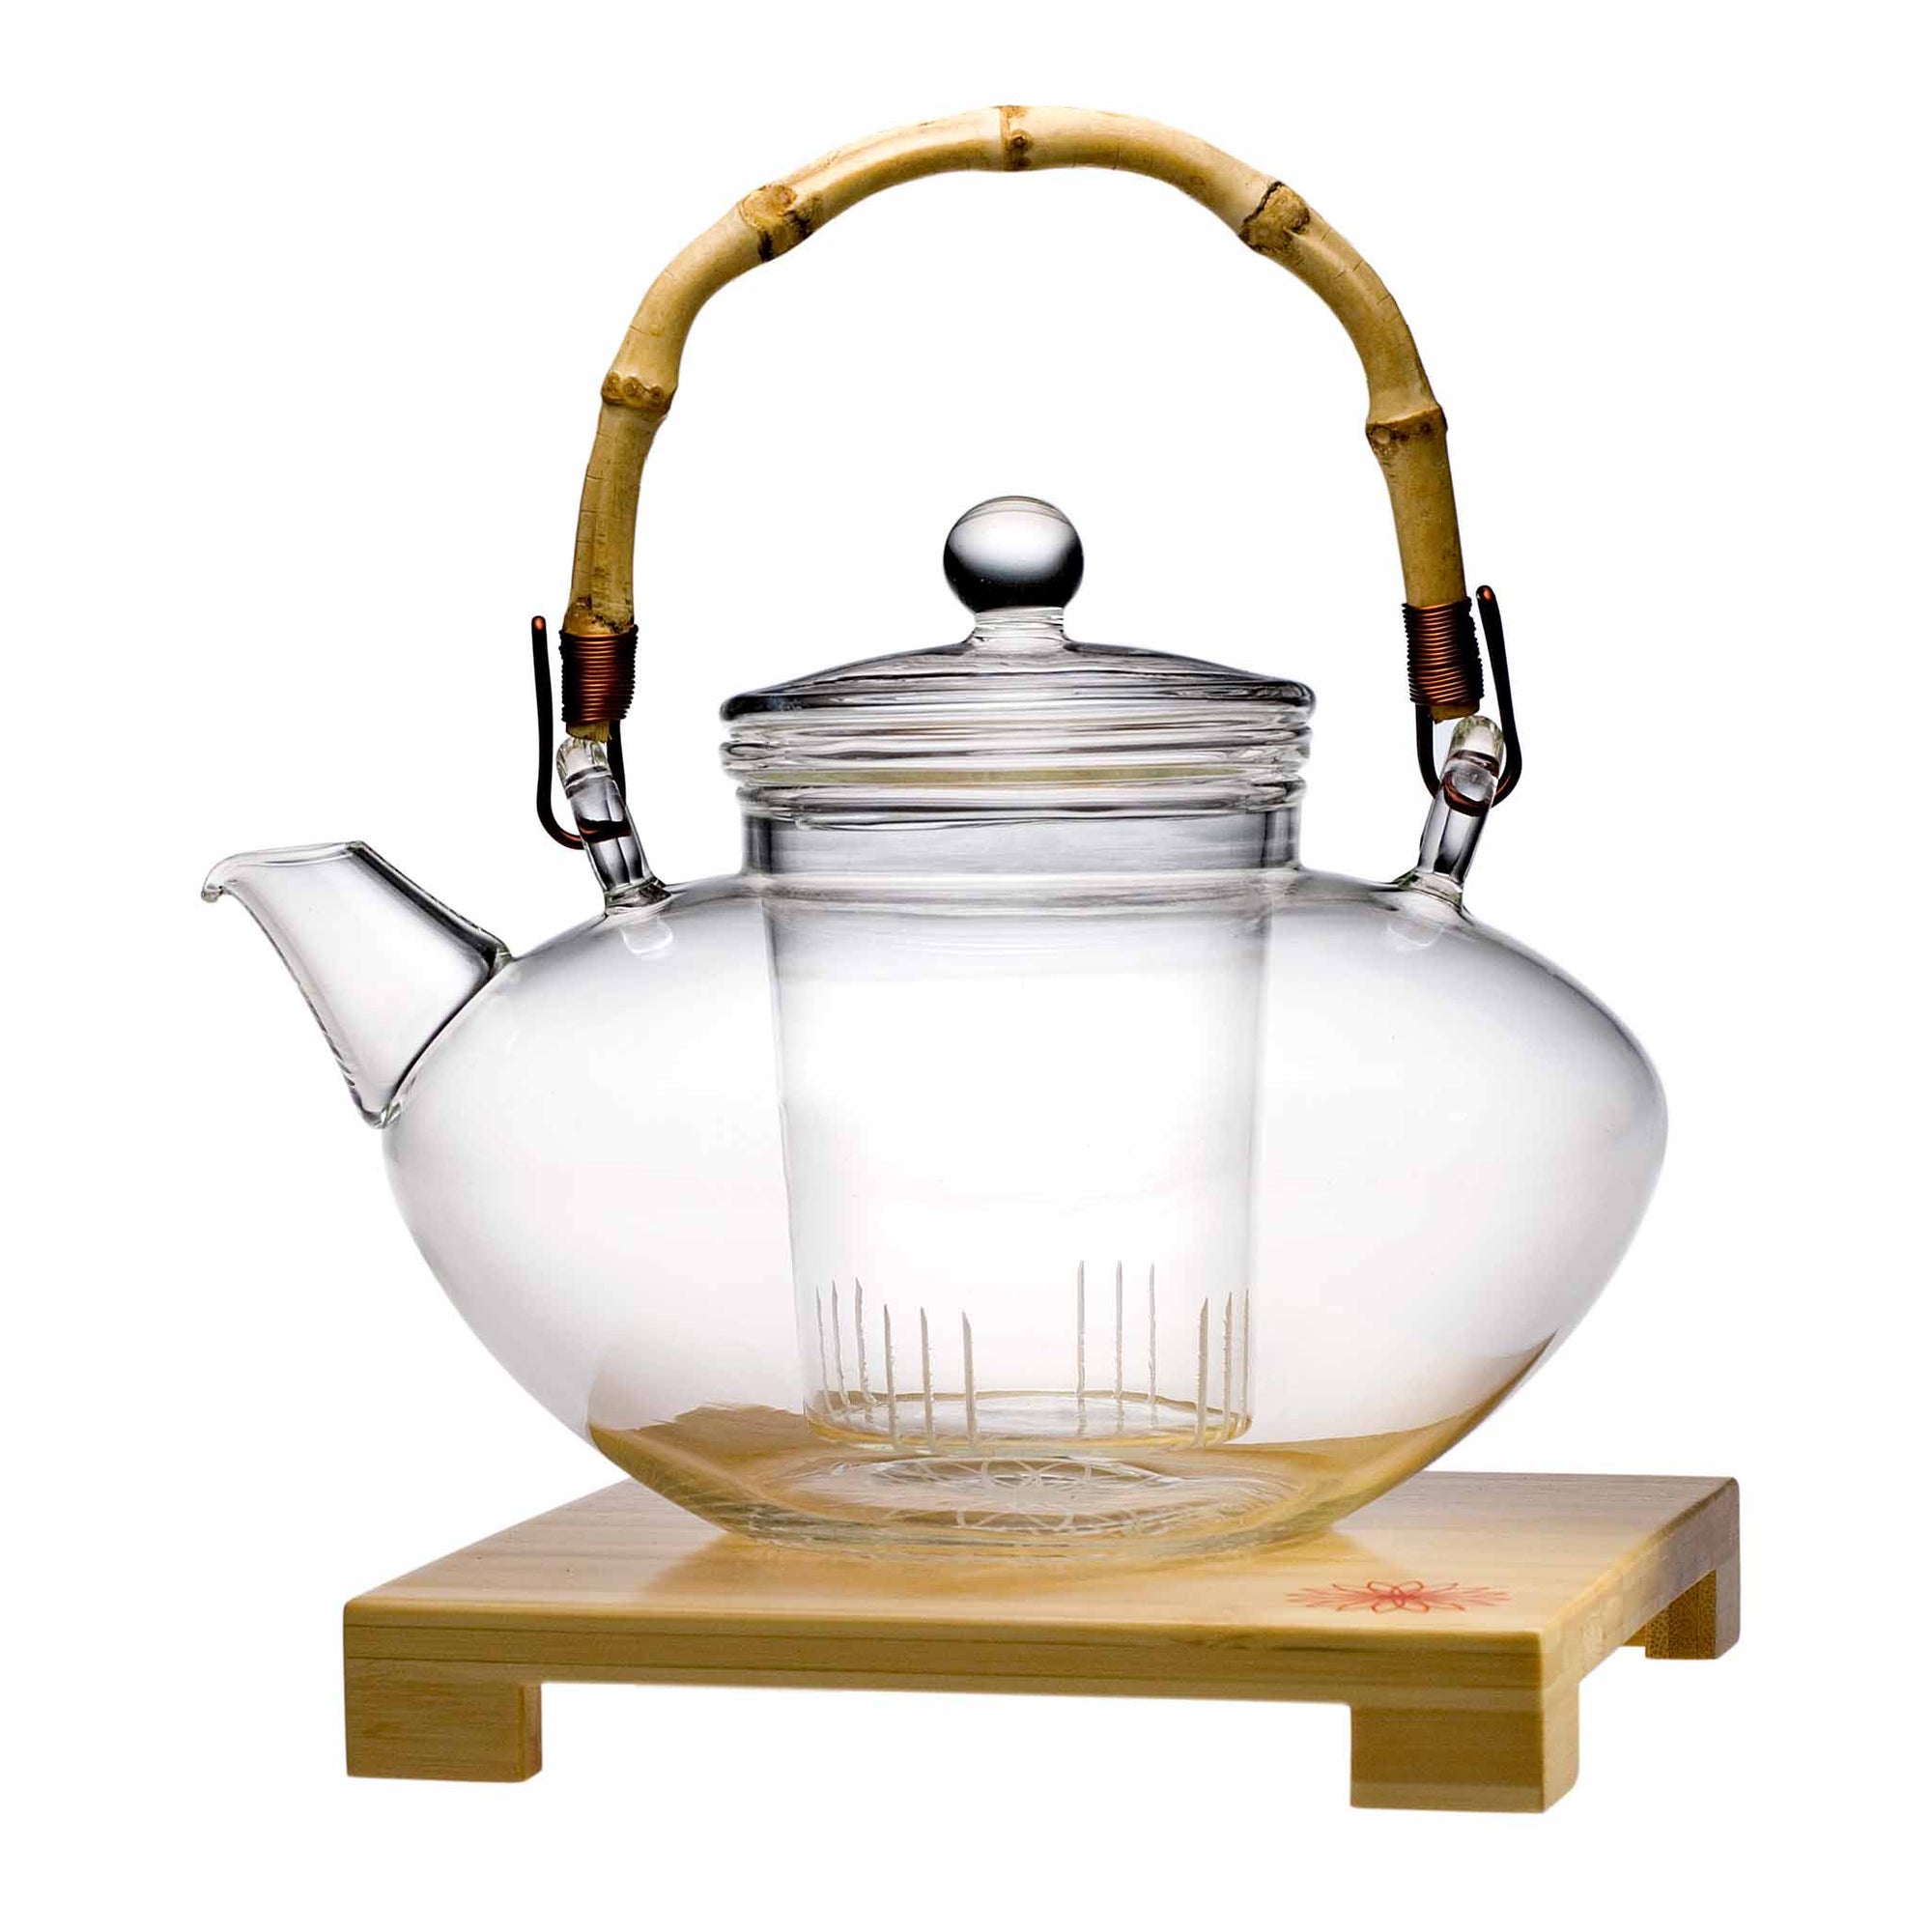 Teaposy tea for more glass teapot with bamboo stand, bamboo handle and removable glass loose tea infuser